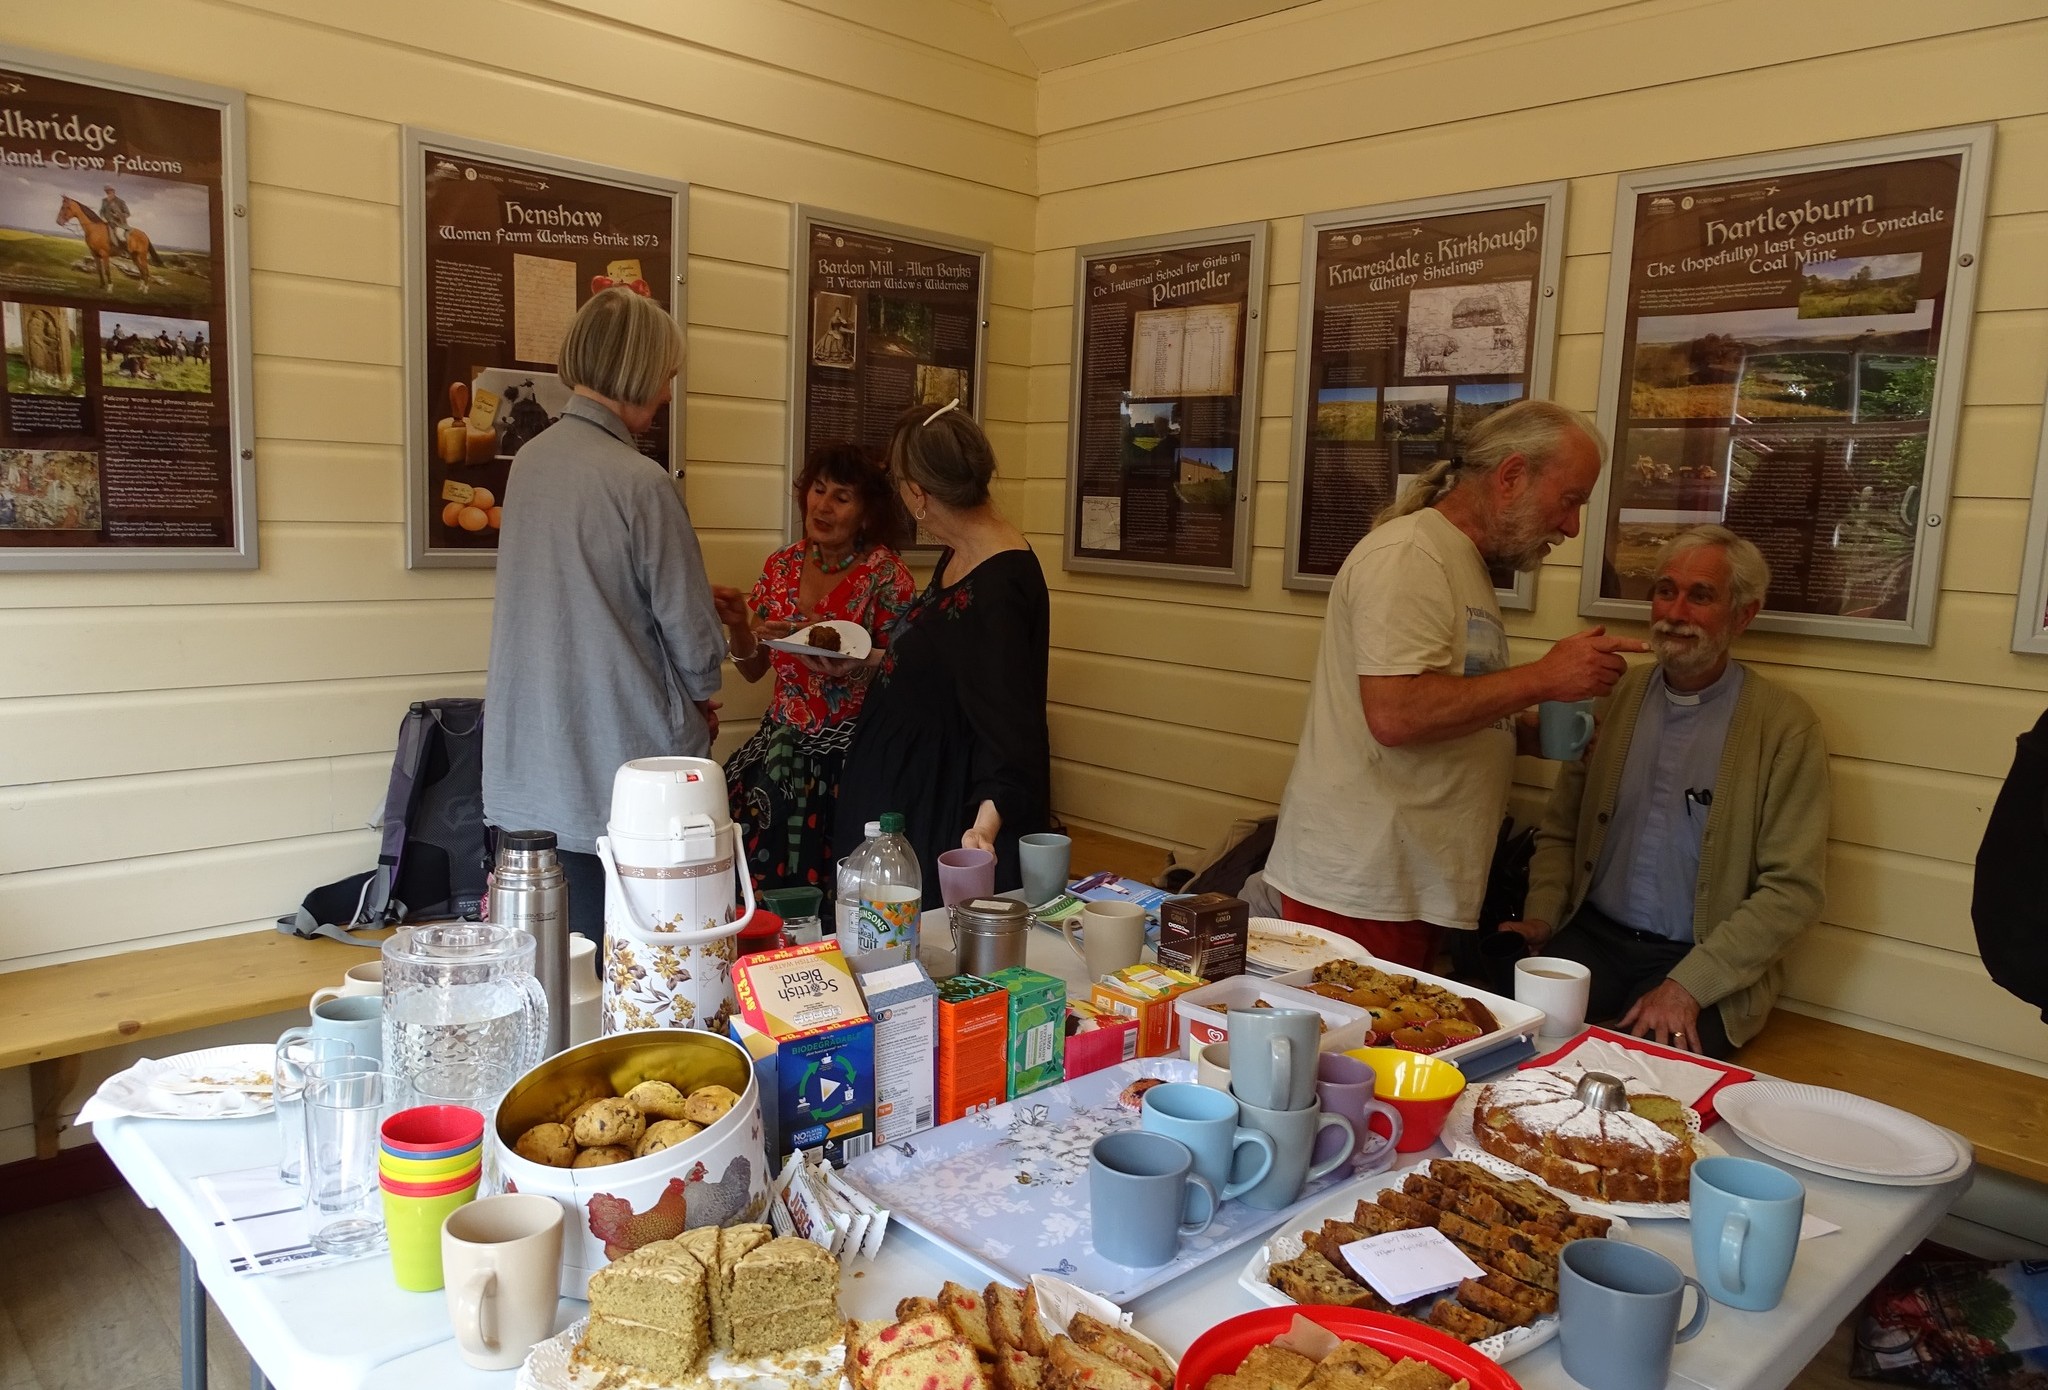 this-image-shows-community-members-enjoying-the-new-exhibition-at-haltwhistle-station